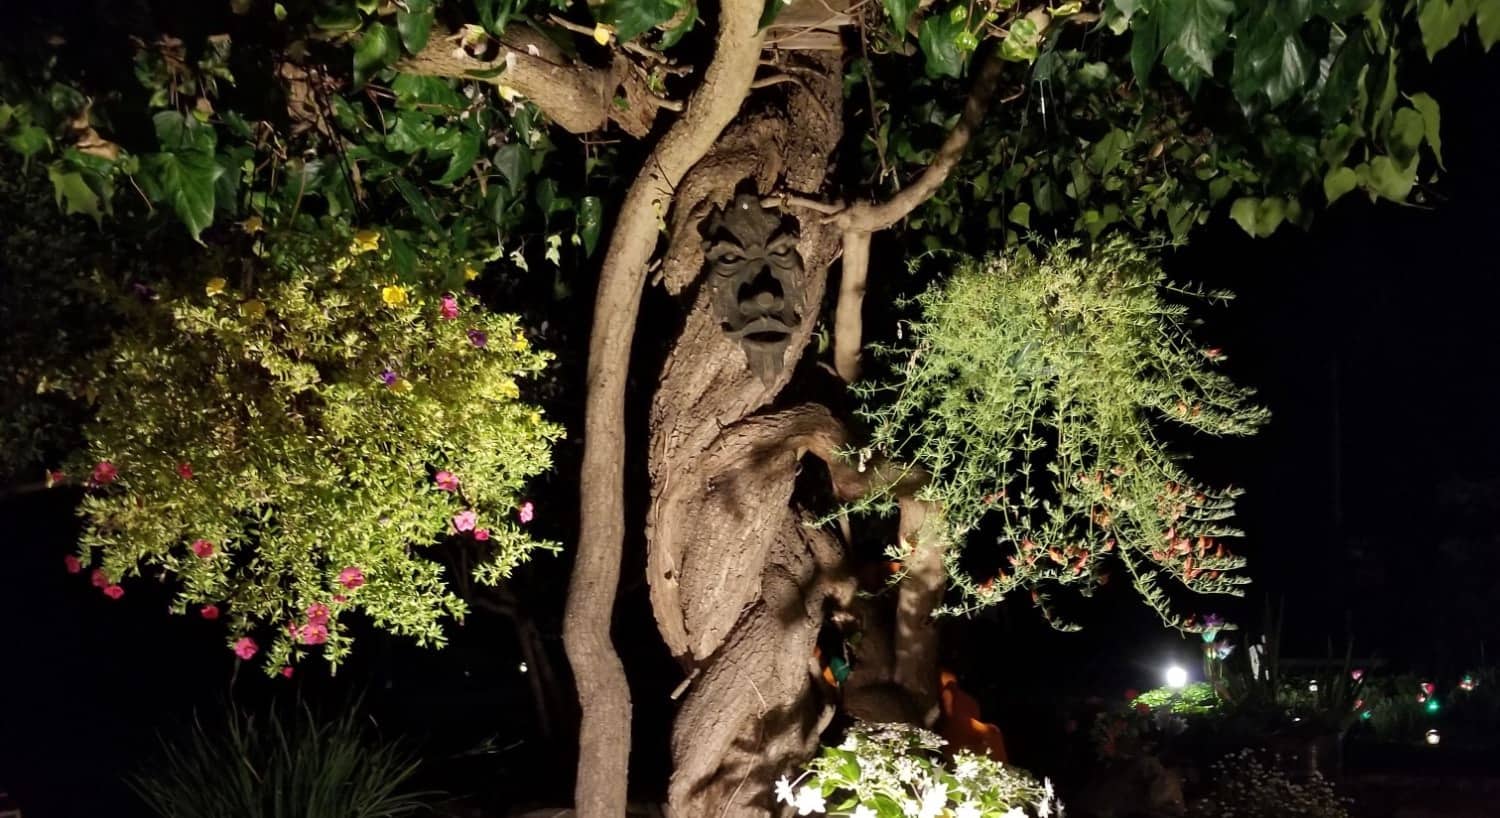 View of tree with twisted trunk and wooden mask at night with a spotlight surrounded by hanging flowers baskets